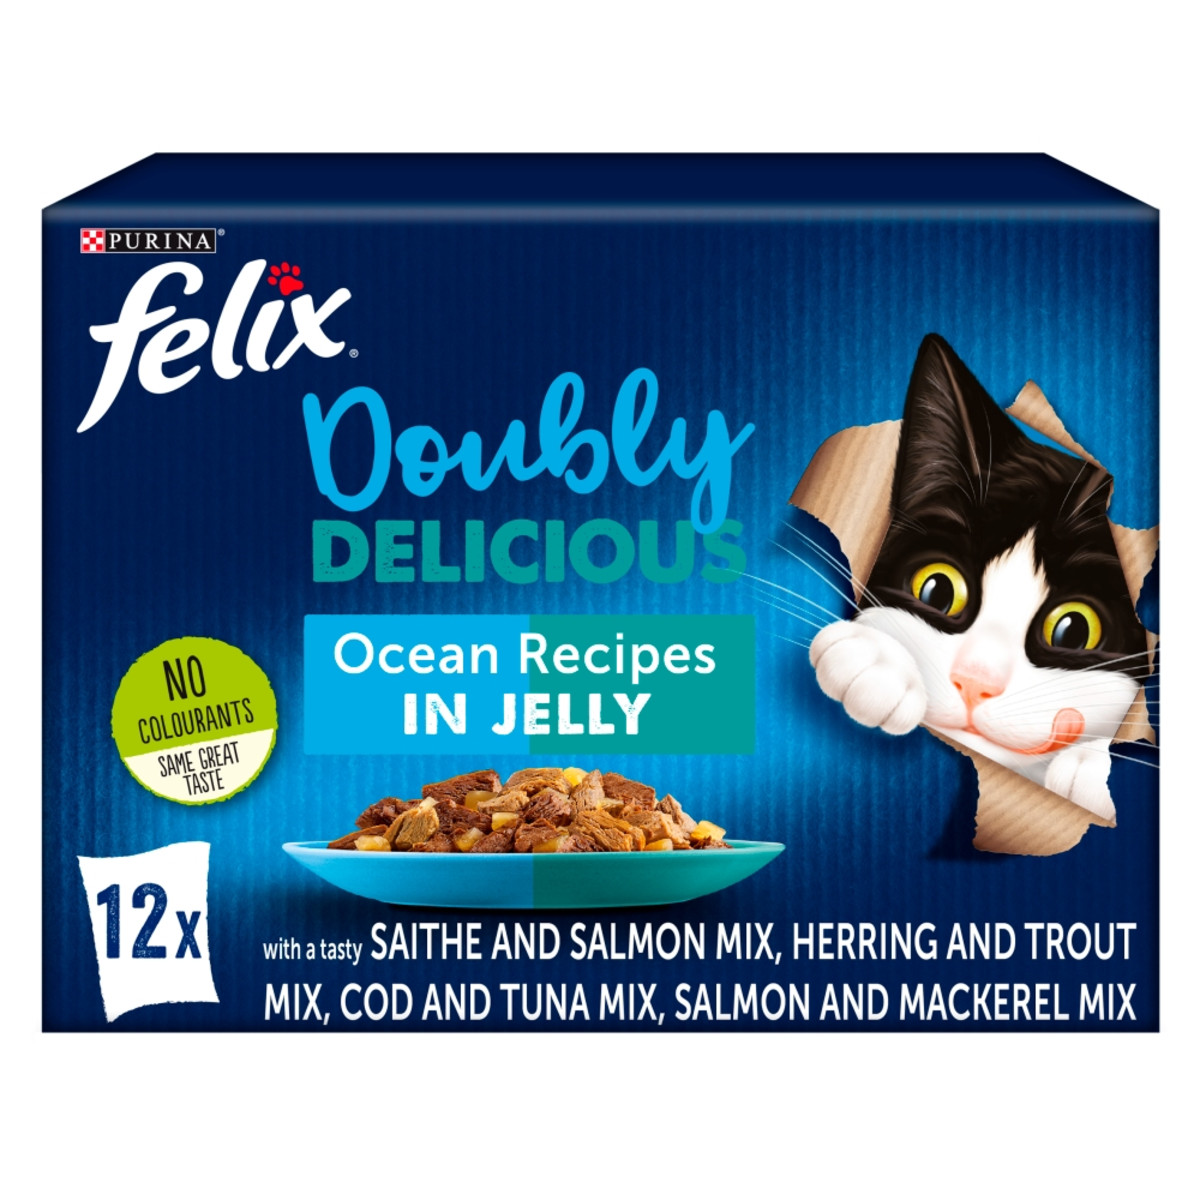 Felix Doubly Delicious Ocean Recipes in Jelly Wet Cat Food Pouches